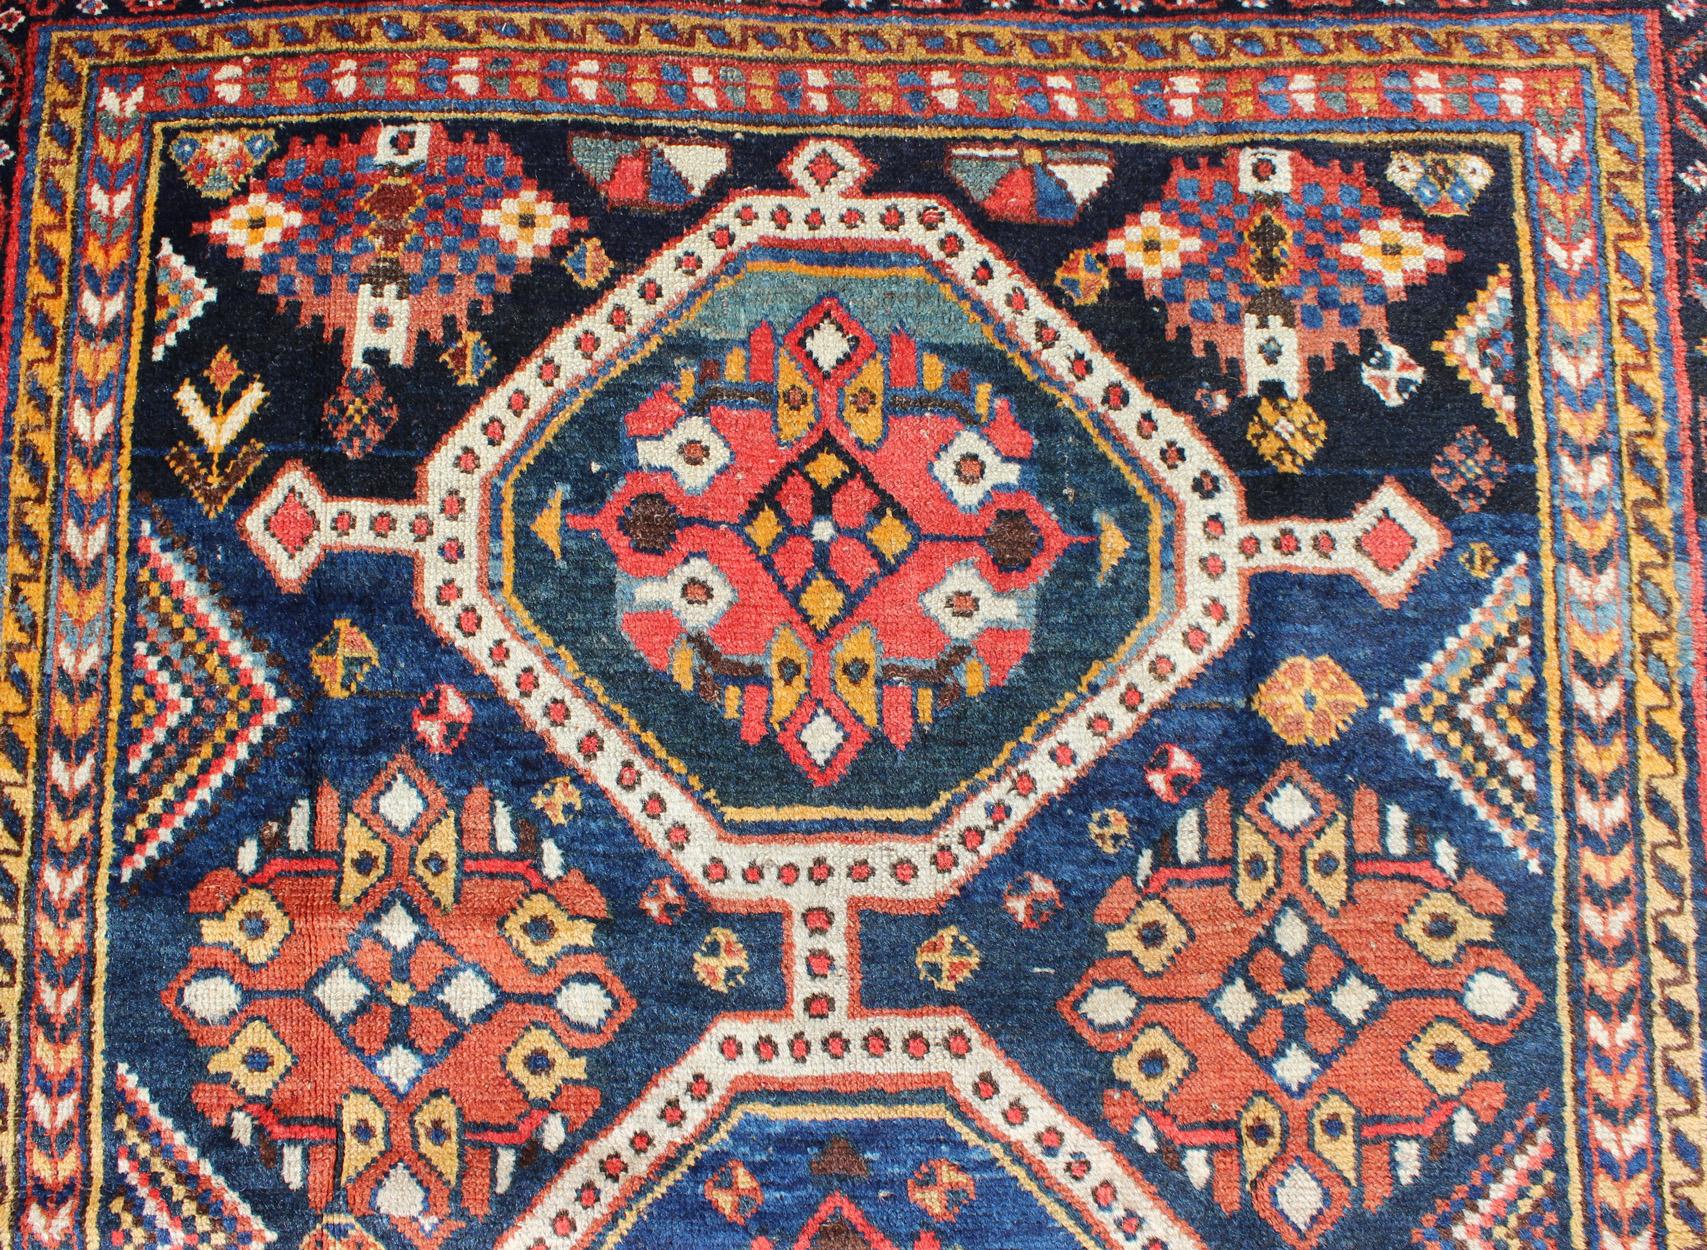 Early 20th Century Antique Persian Qashqai Rug with Four-Medallion Design in Blue, Red, Brown Tones For Sale